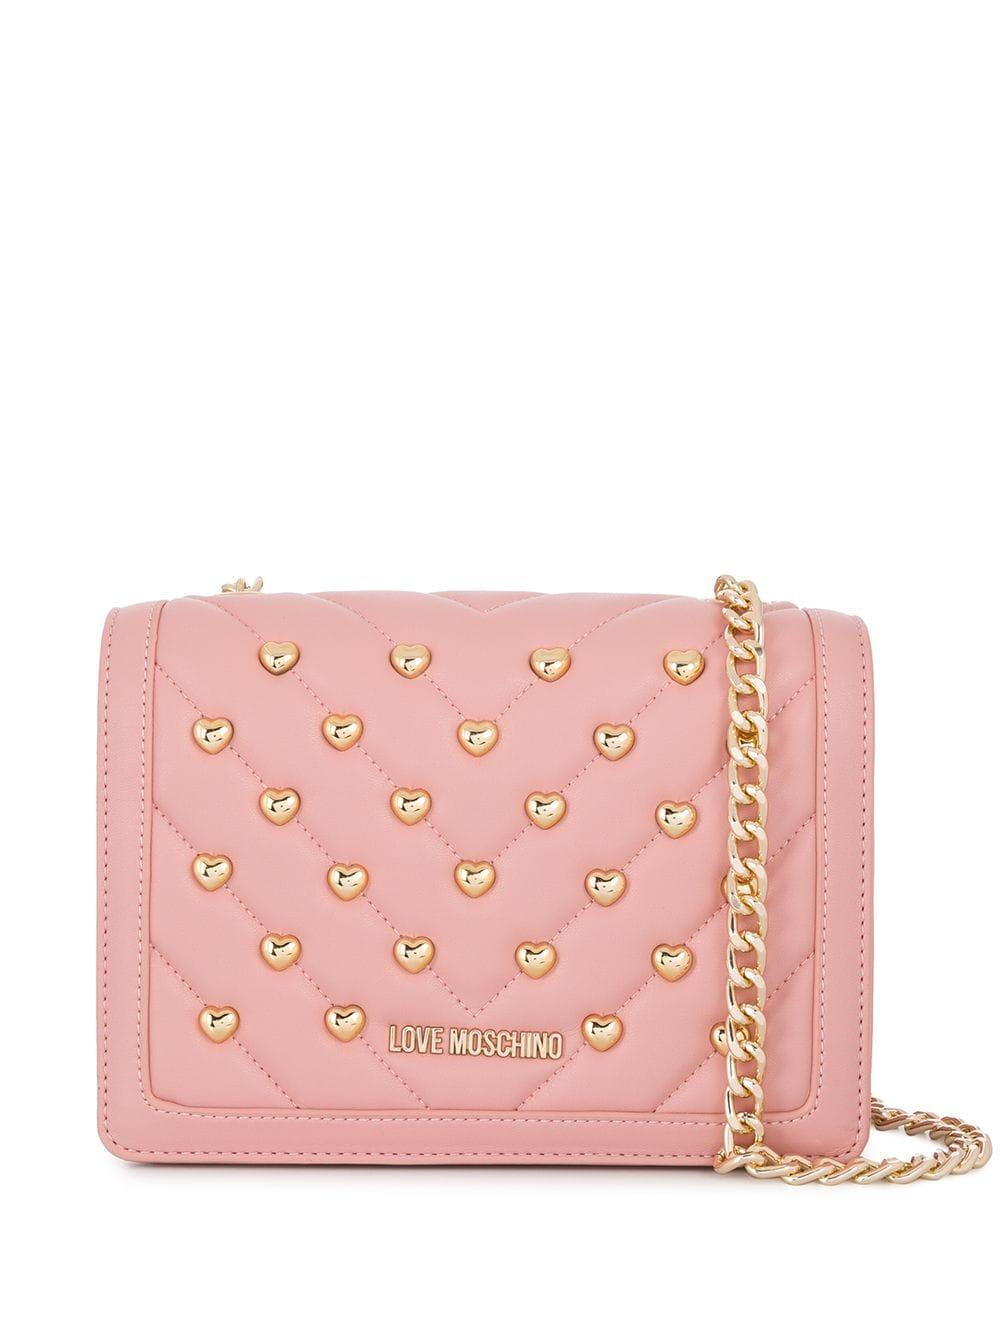 Love Moschino Quilted Crossbody Bag in Pink | Lyst